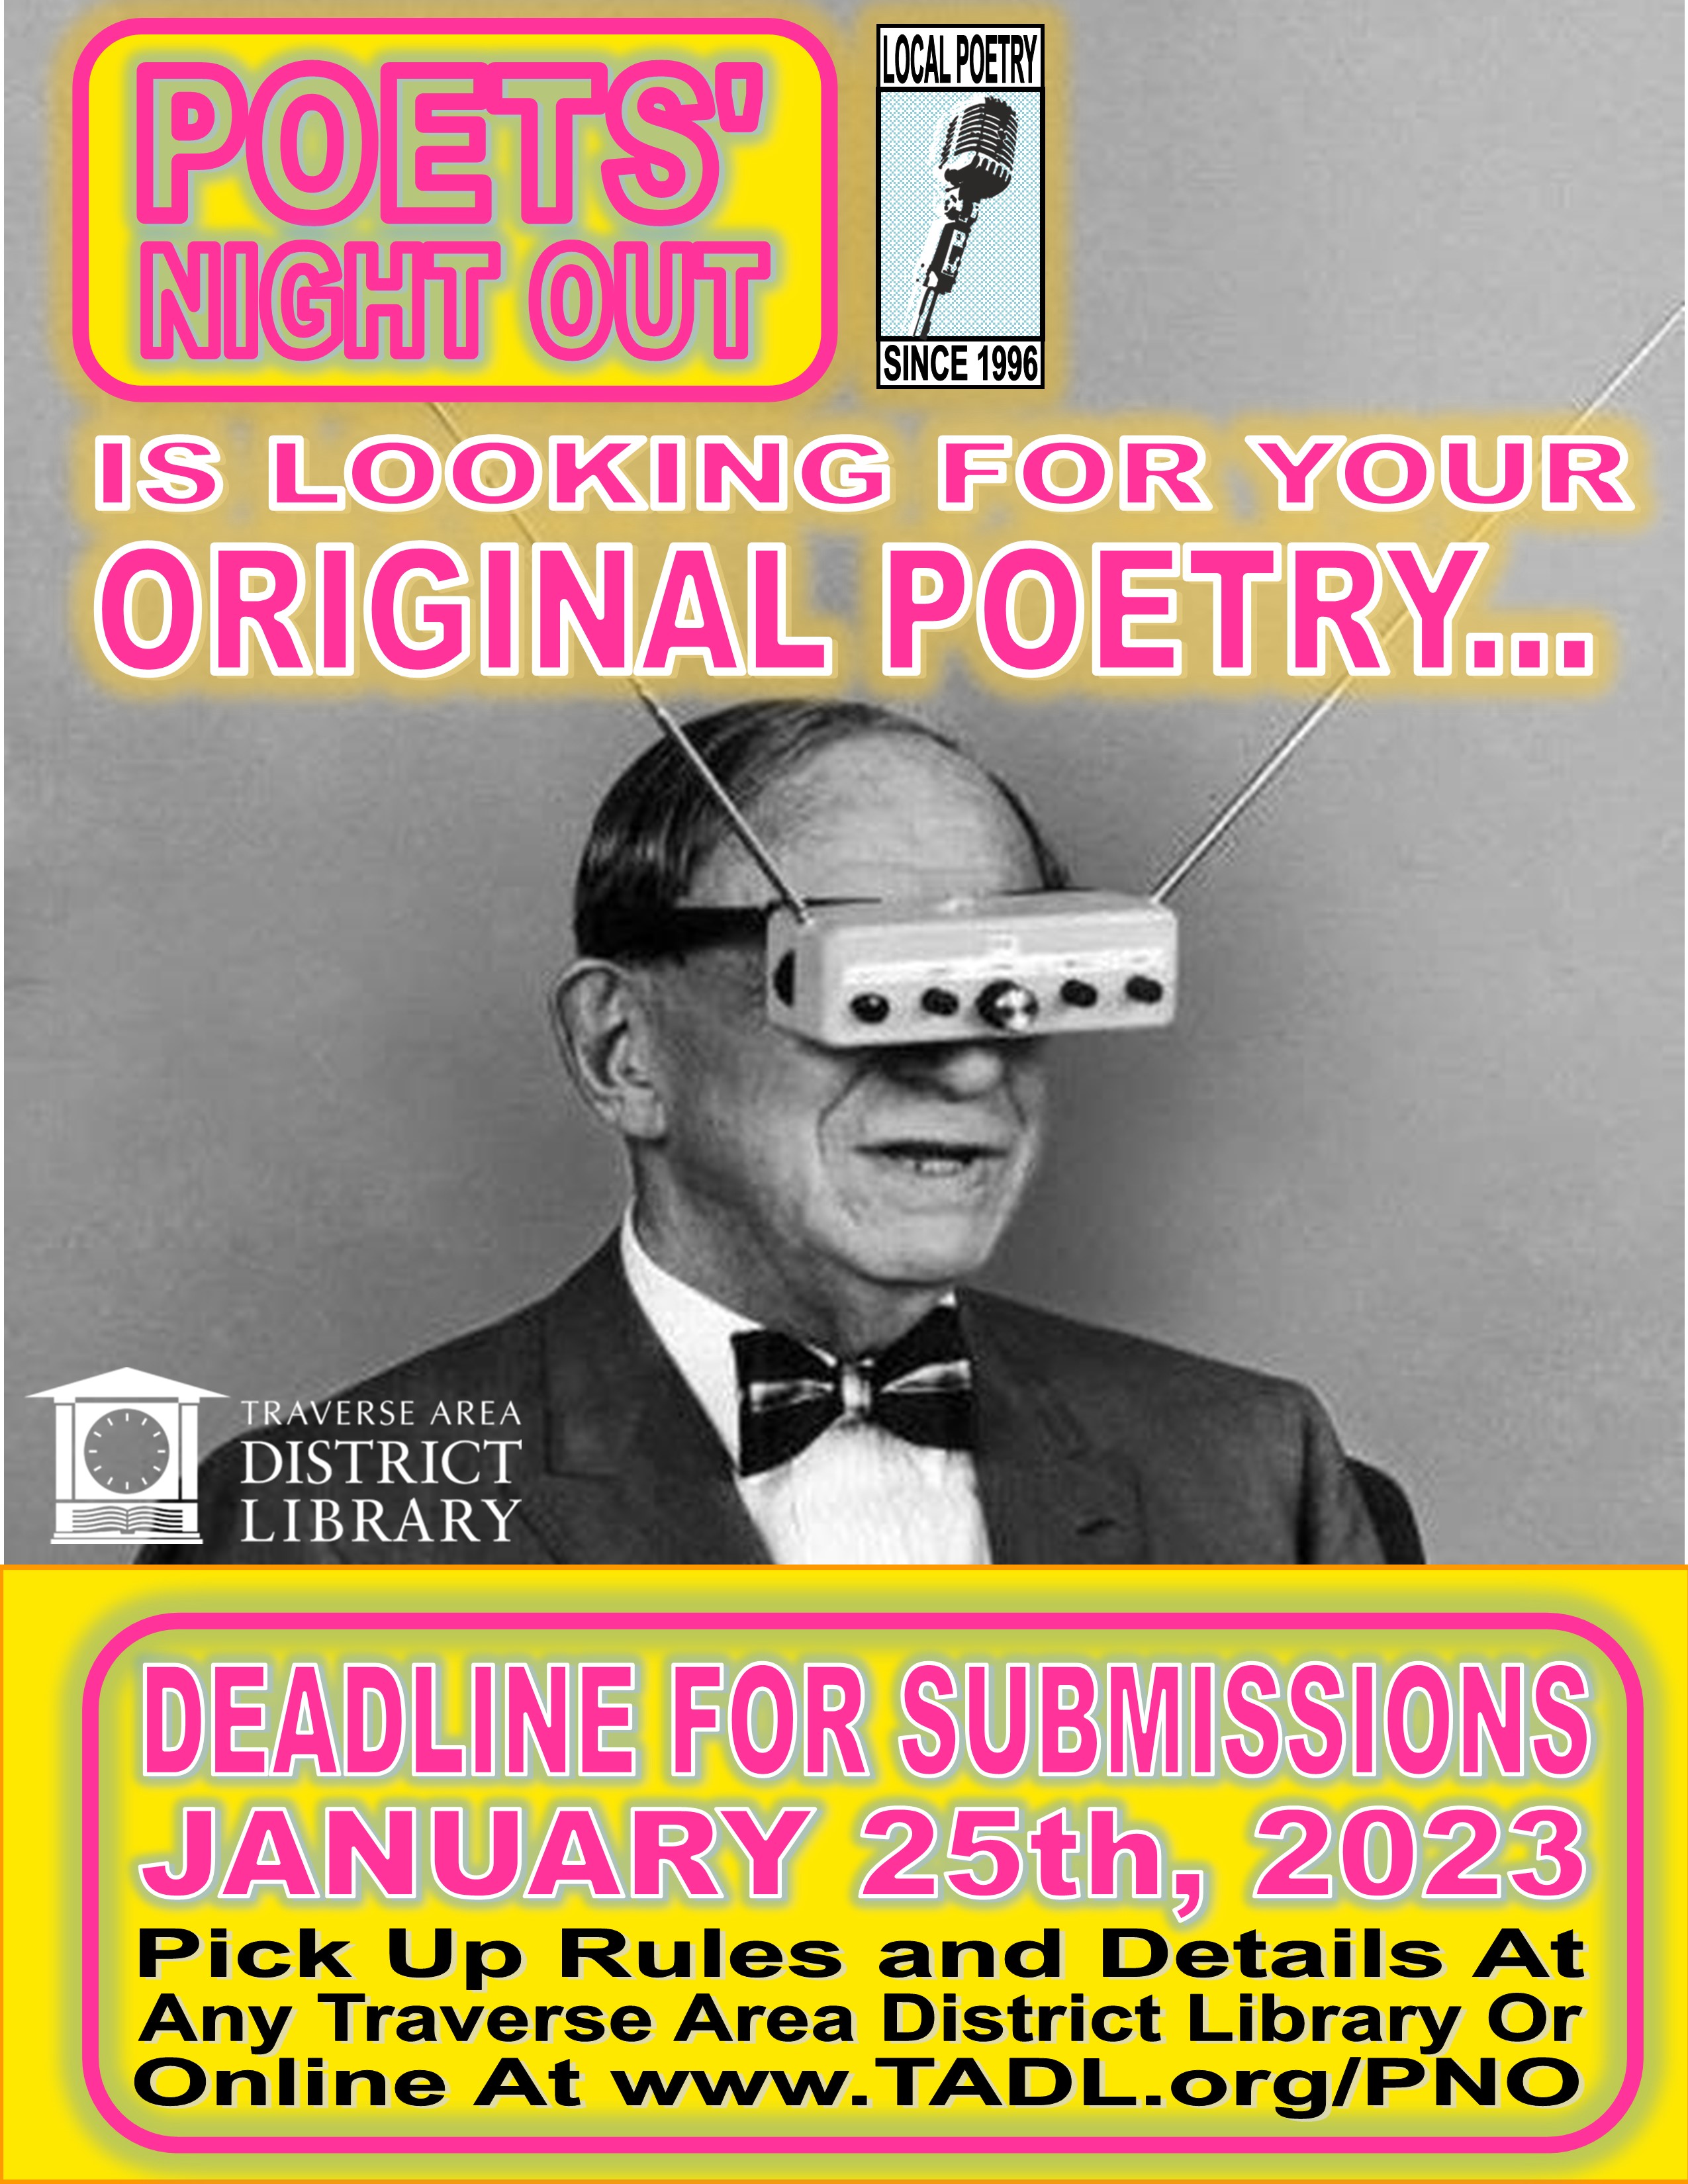 Copy of flyer for Poet's Night Out Submissions. Contains text with due date of January 25, 2023 and a black and white picture of a man wearing strange glasses